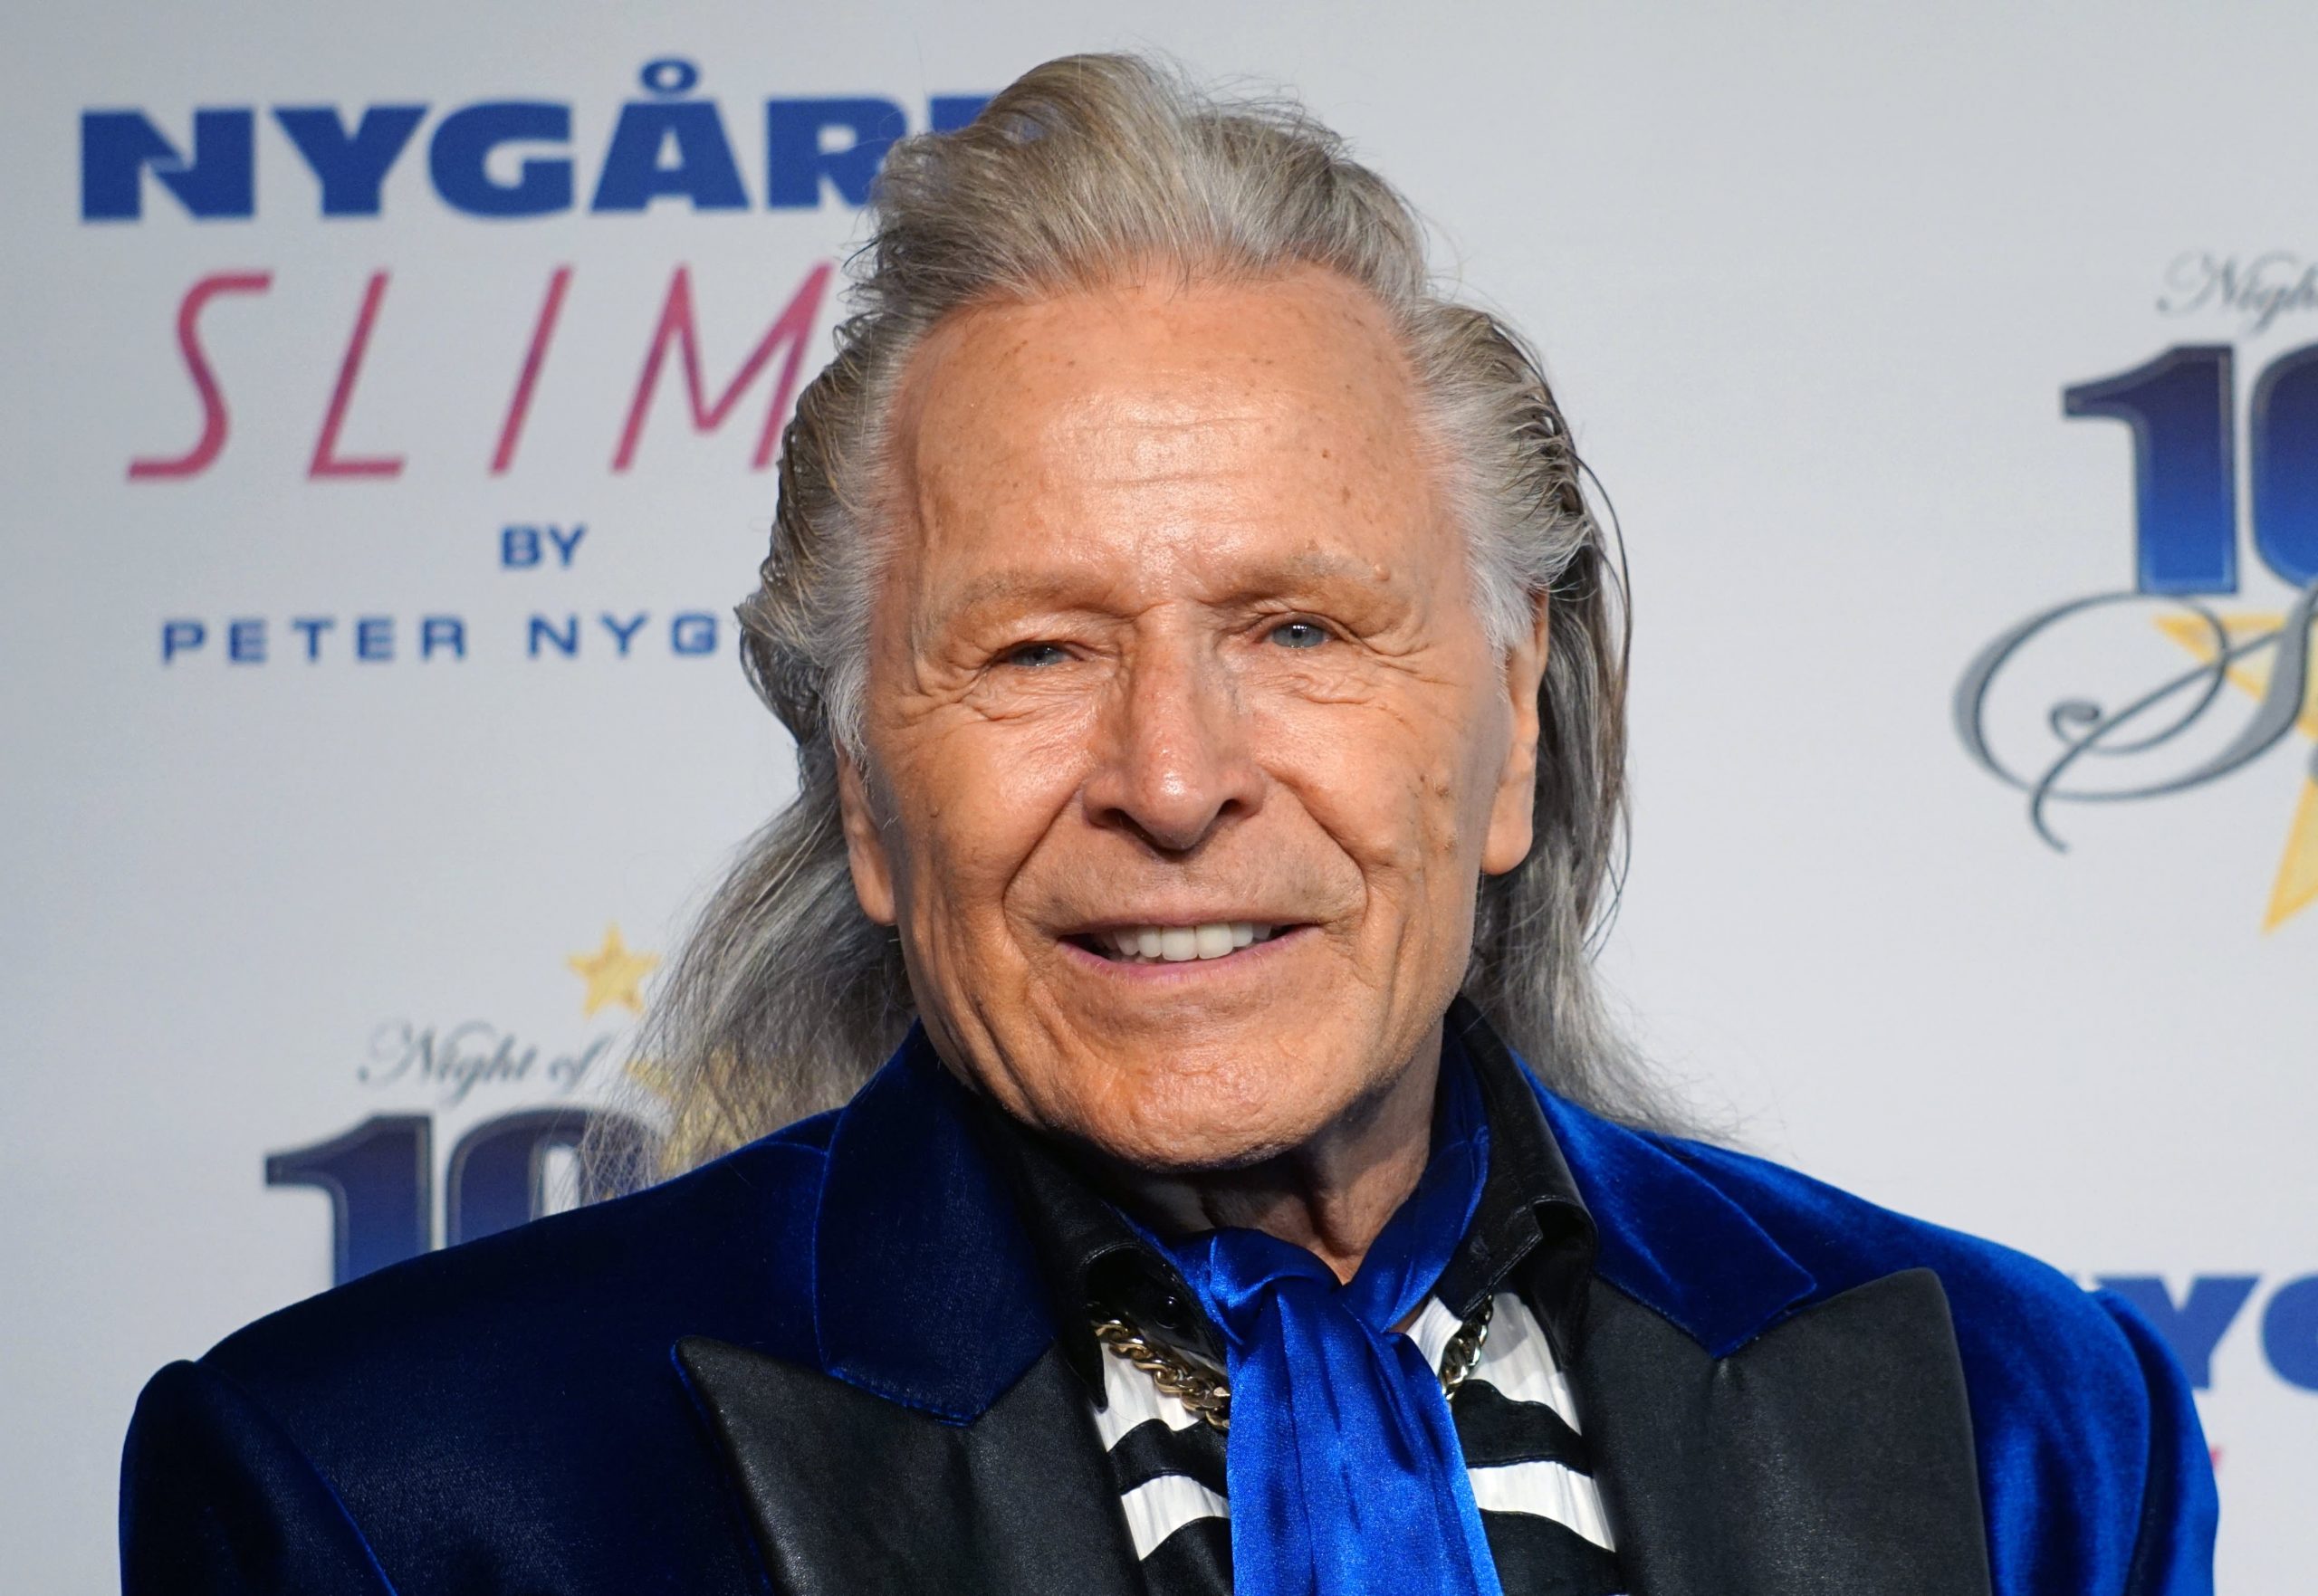 Style mogul Peter Nygard indicted on intercourse trafficking, racketeering costs